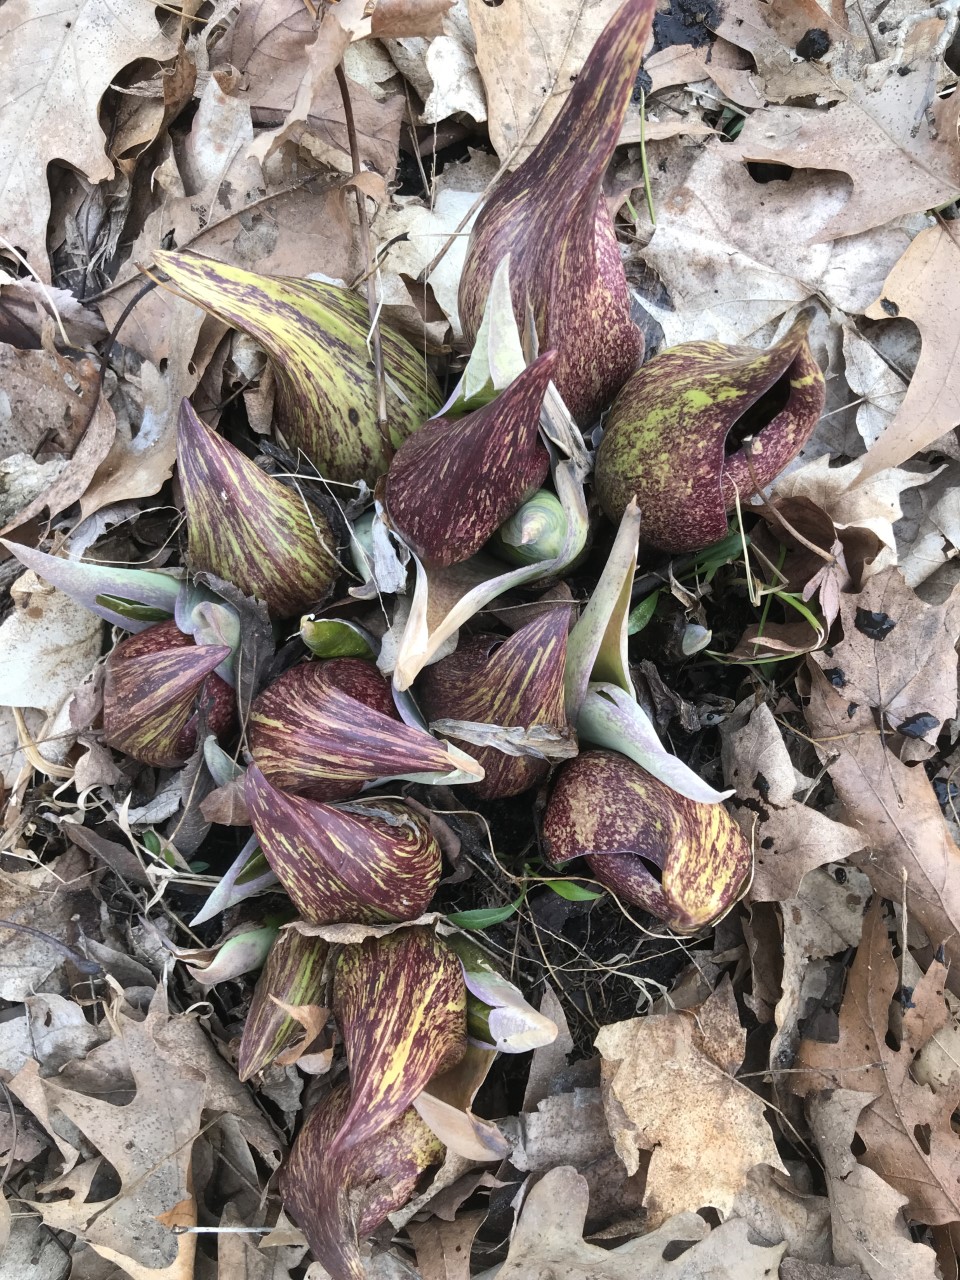 Skunk cabbage emerging through last fall's leaf litter